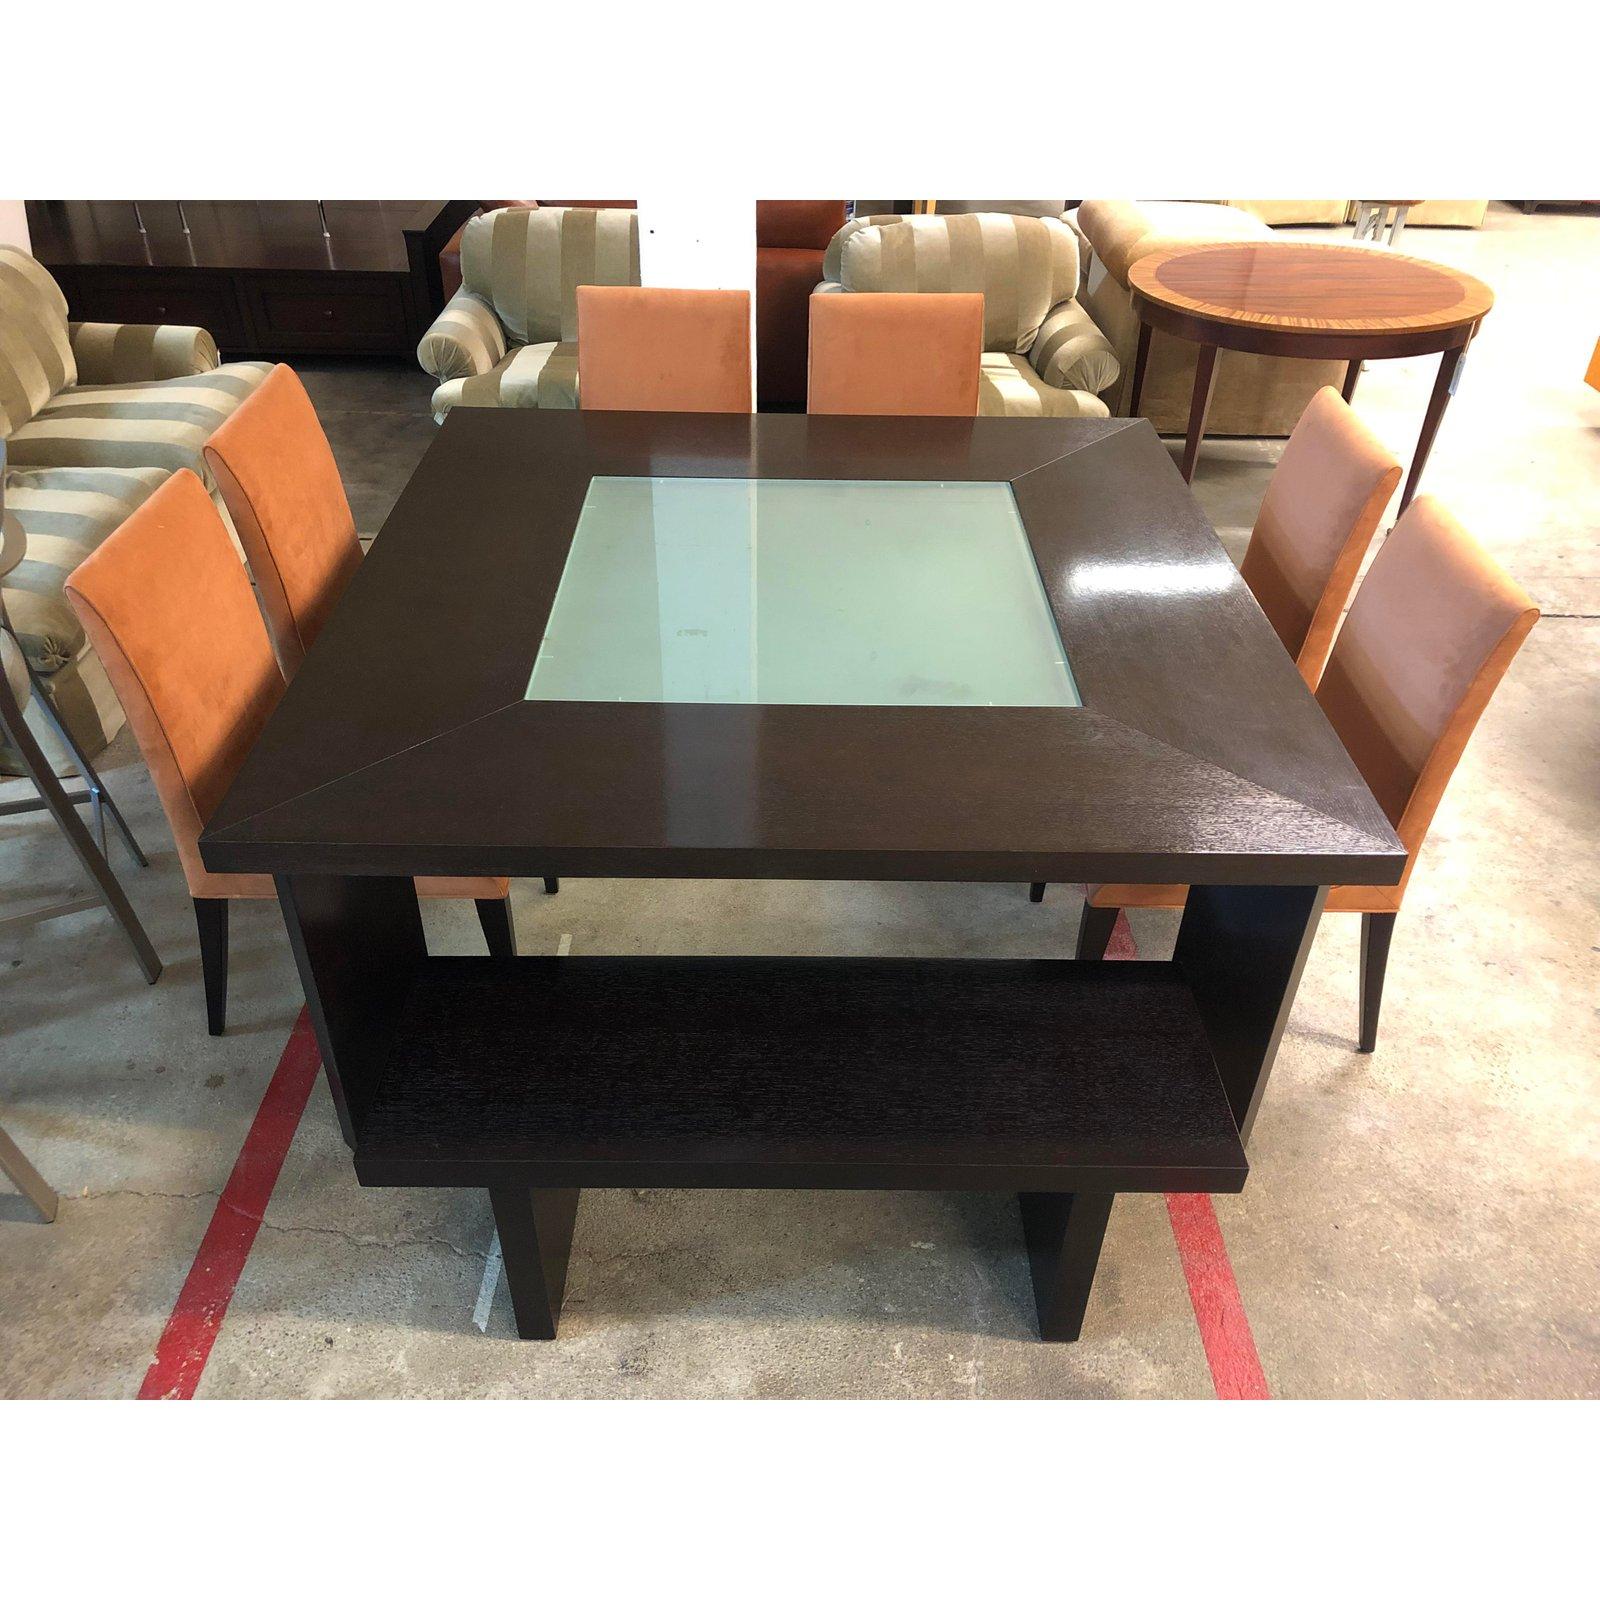 A dining set by Creative Elegance. A set from the Visions Collection. A square wood table in a dark chocolate finish with a Frost glass center insert. Accompanied with a set of six Ceylon chairs is a Aztec Ultrasuede fabric. Minor wear on fabric and